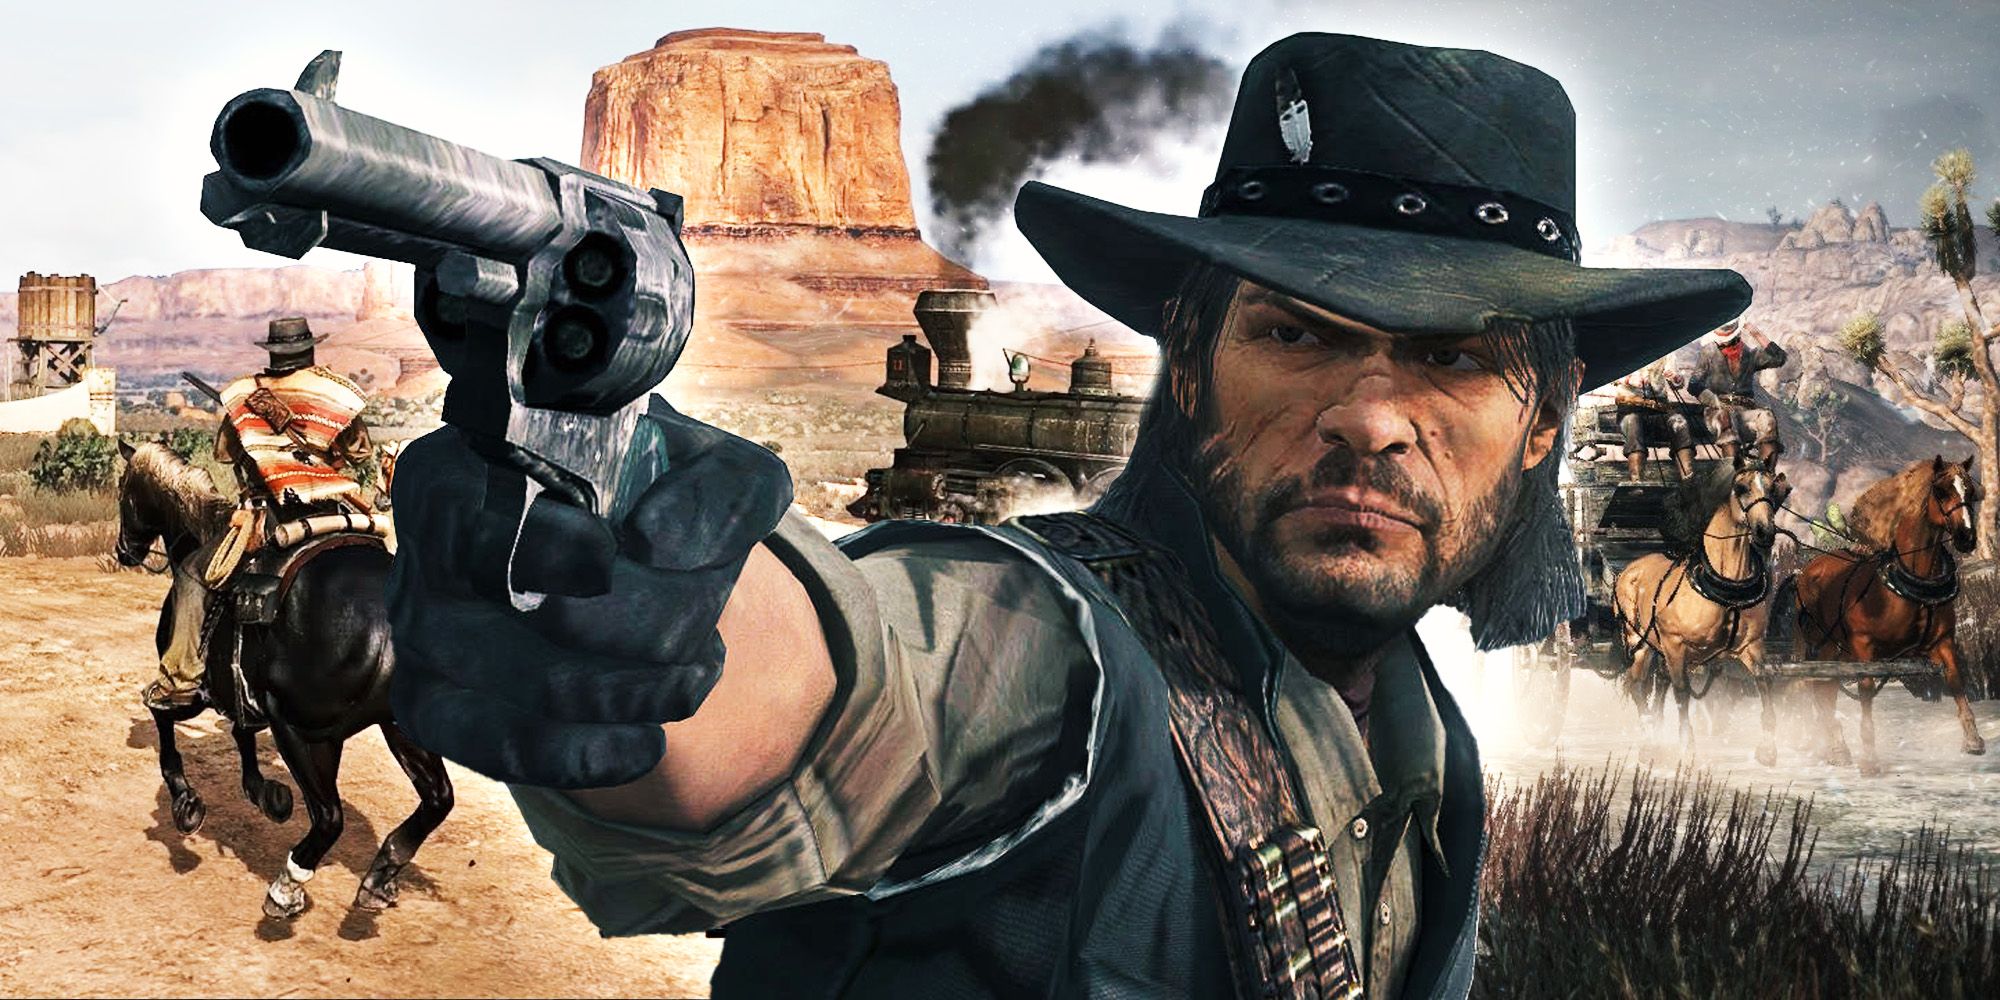 Red Dead Redemption coming to PS4 and Nintendo Switch later this